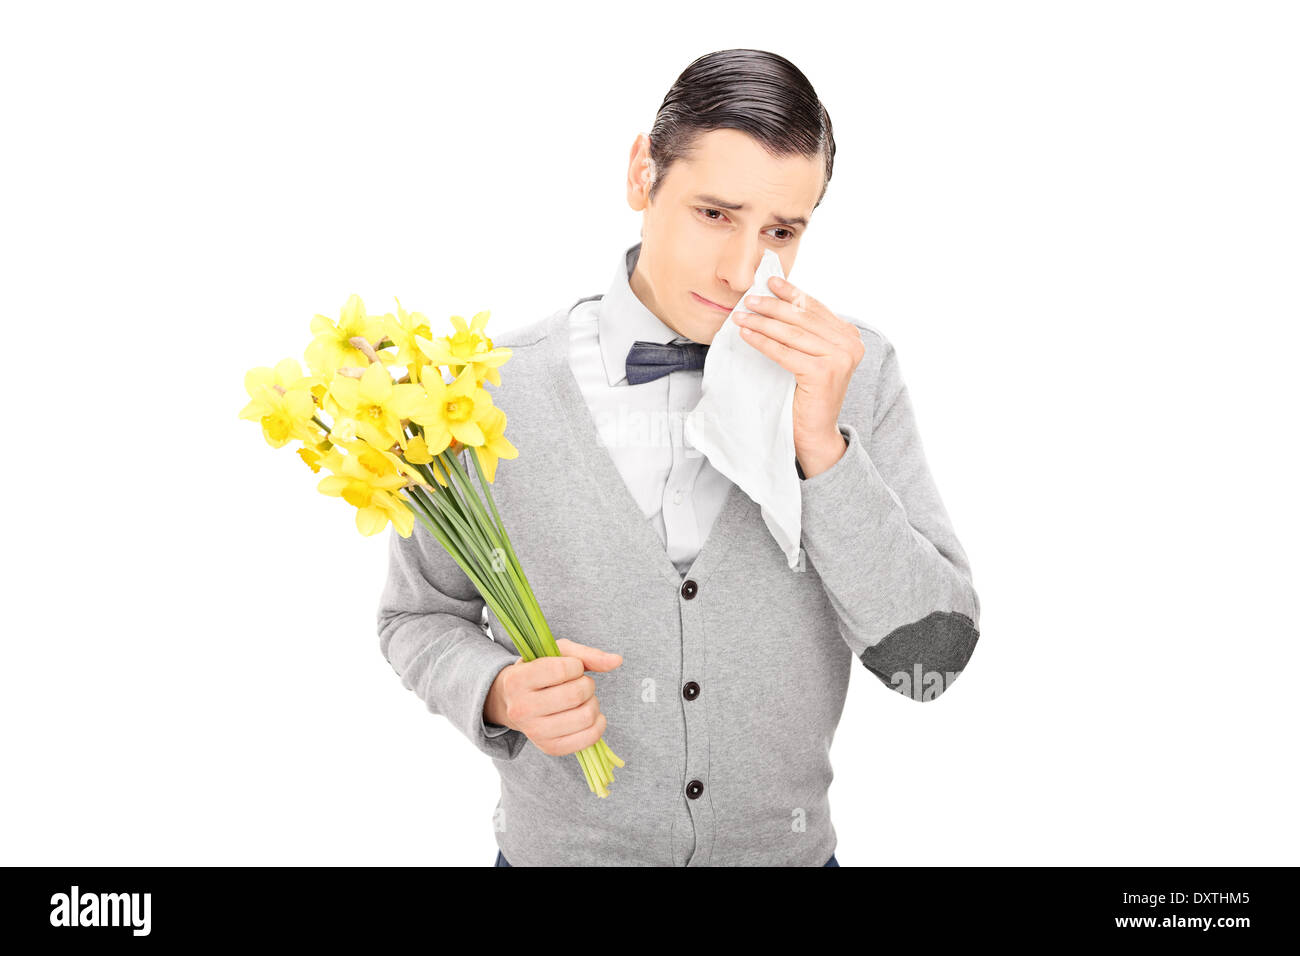 sad-man-holding-bunch-of-flowers-and-crying-DXTHM5.jpg